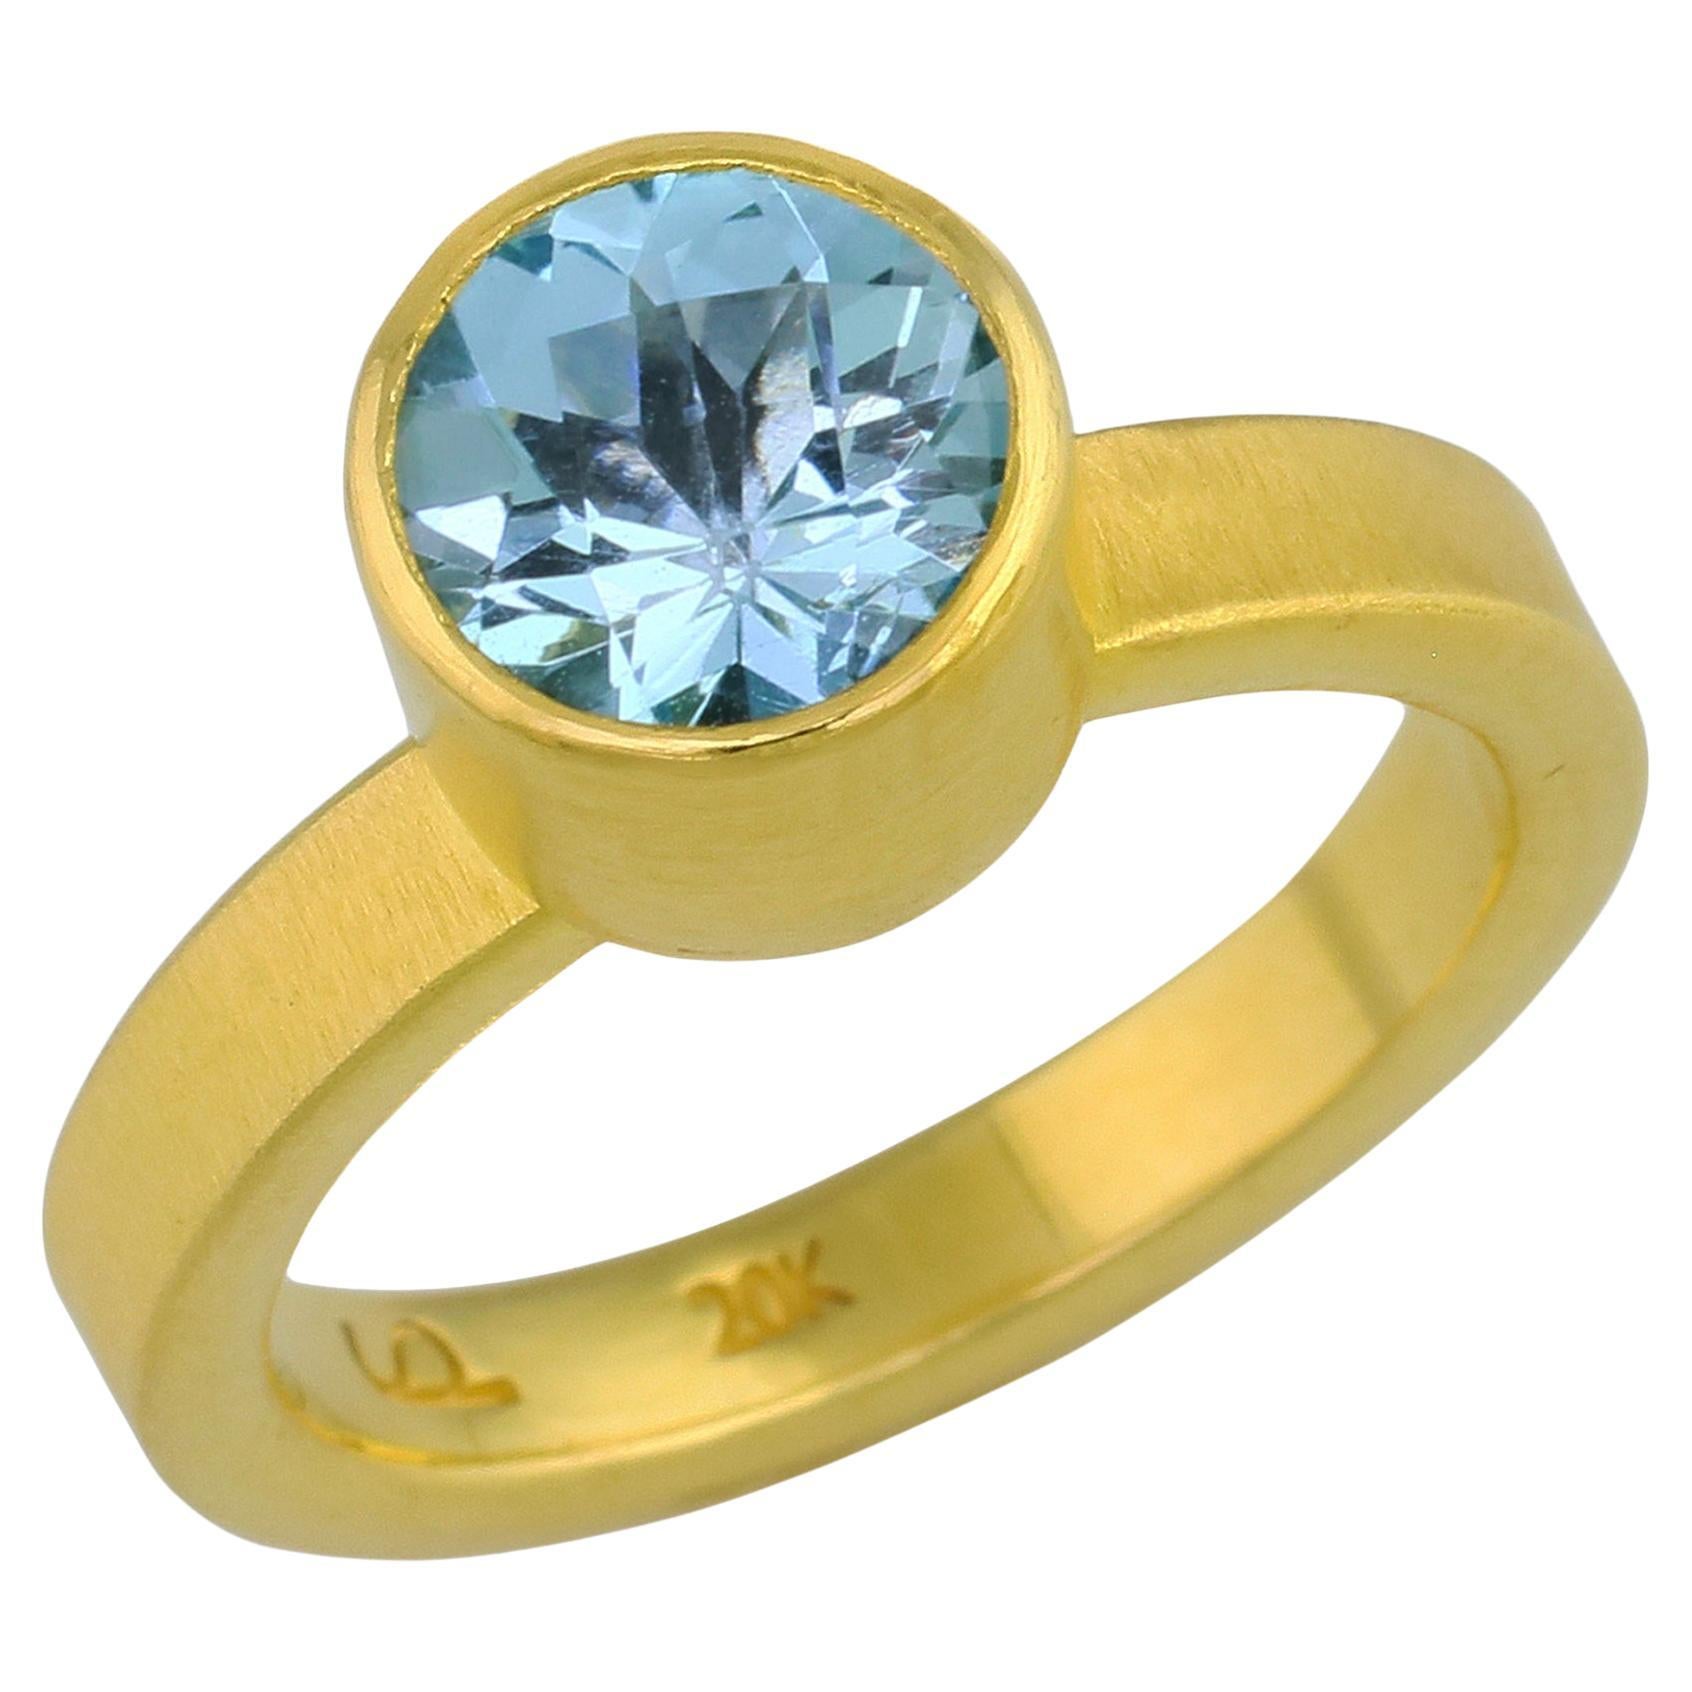 PHILIPPE SPENCER 2.5 Ct. Blue Topaz in 22K and 20K Gold Statement Ring For Sale